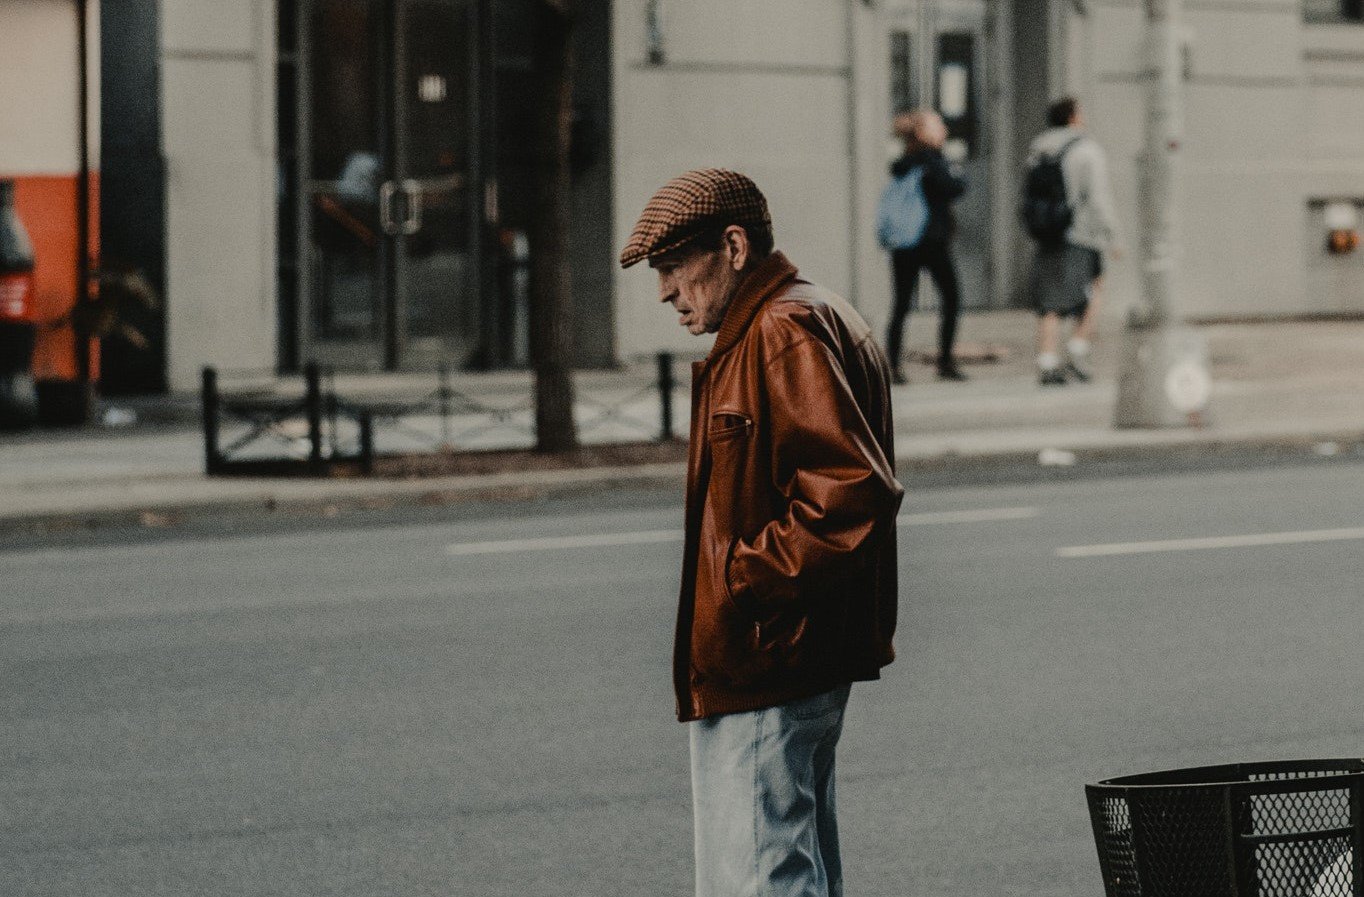 An old man was selling something across the street. | Source: Pexels